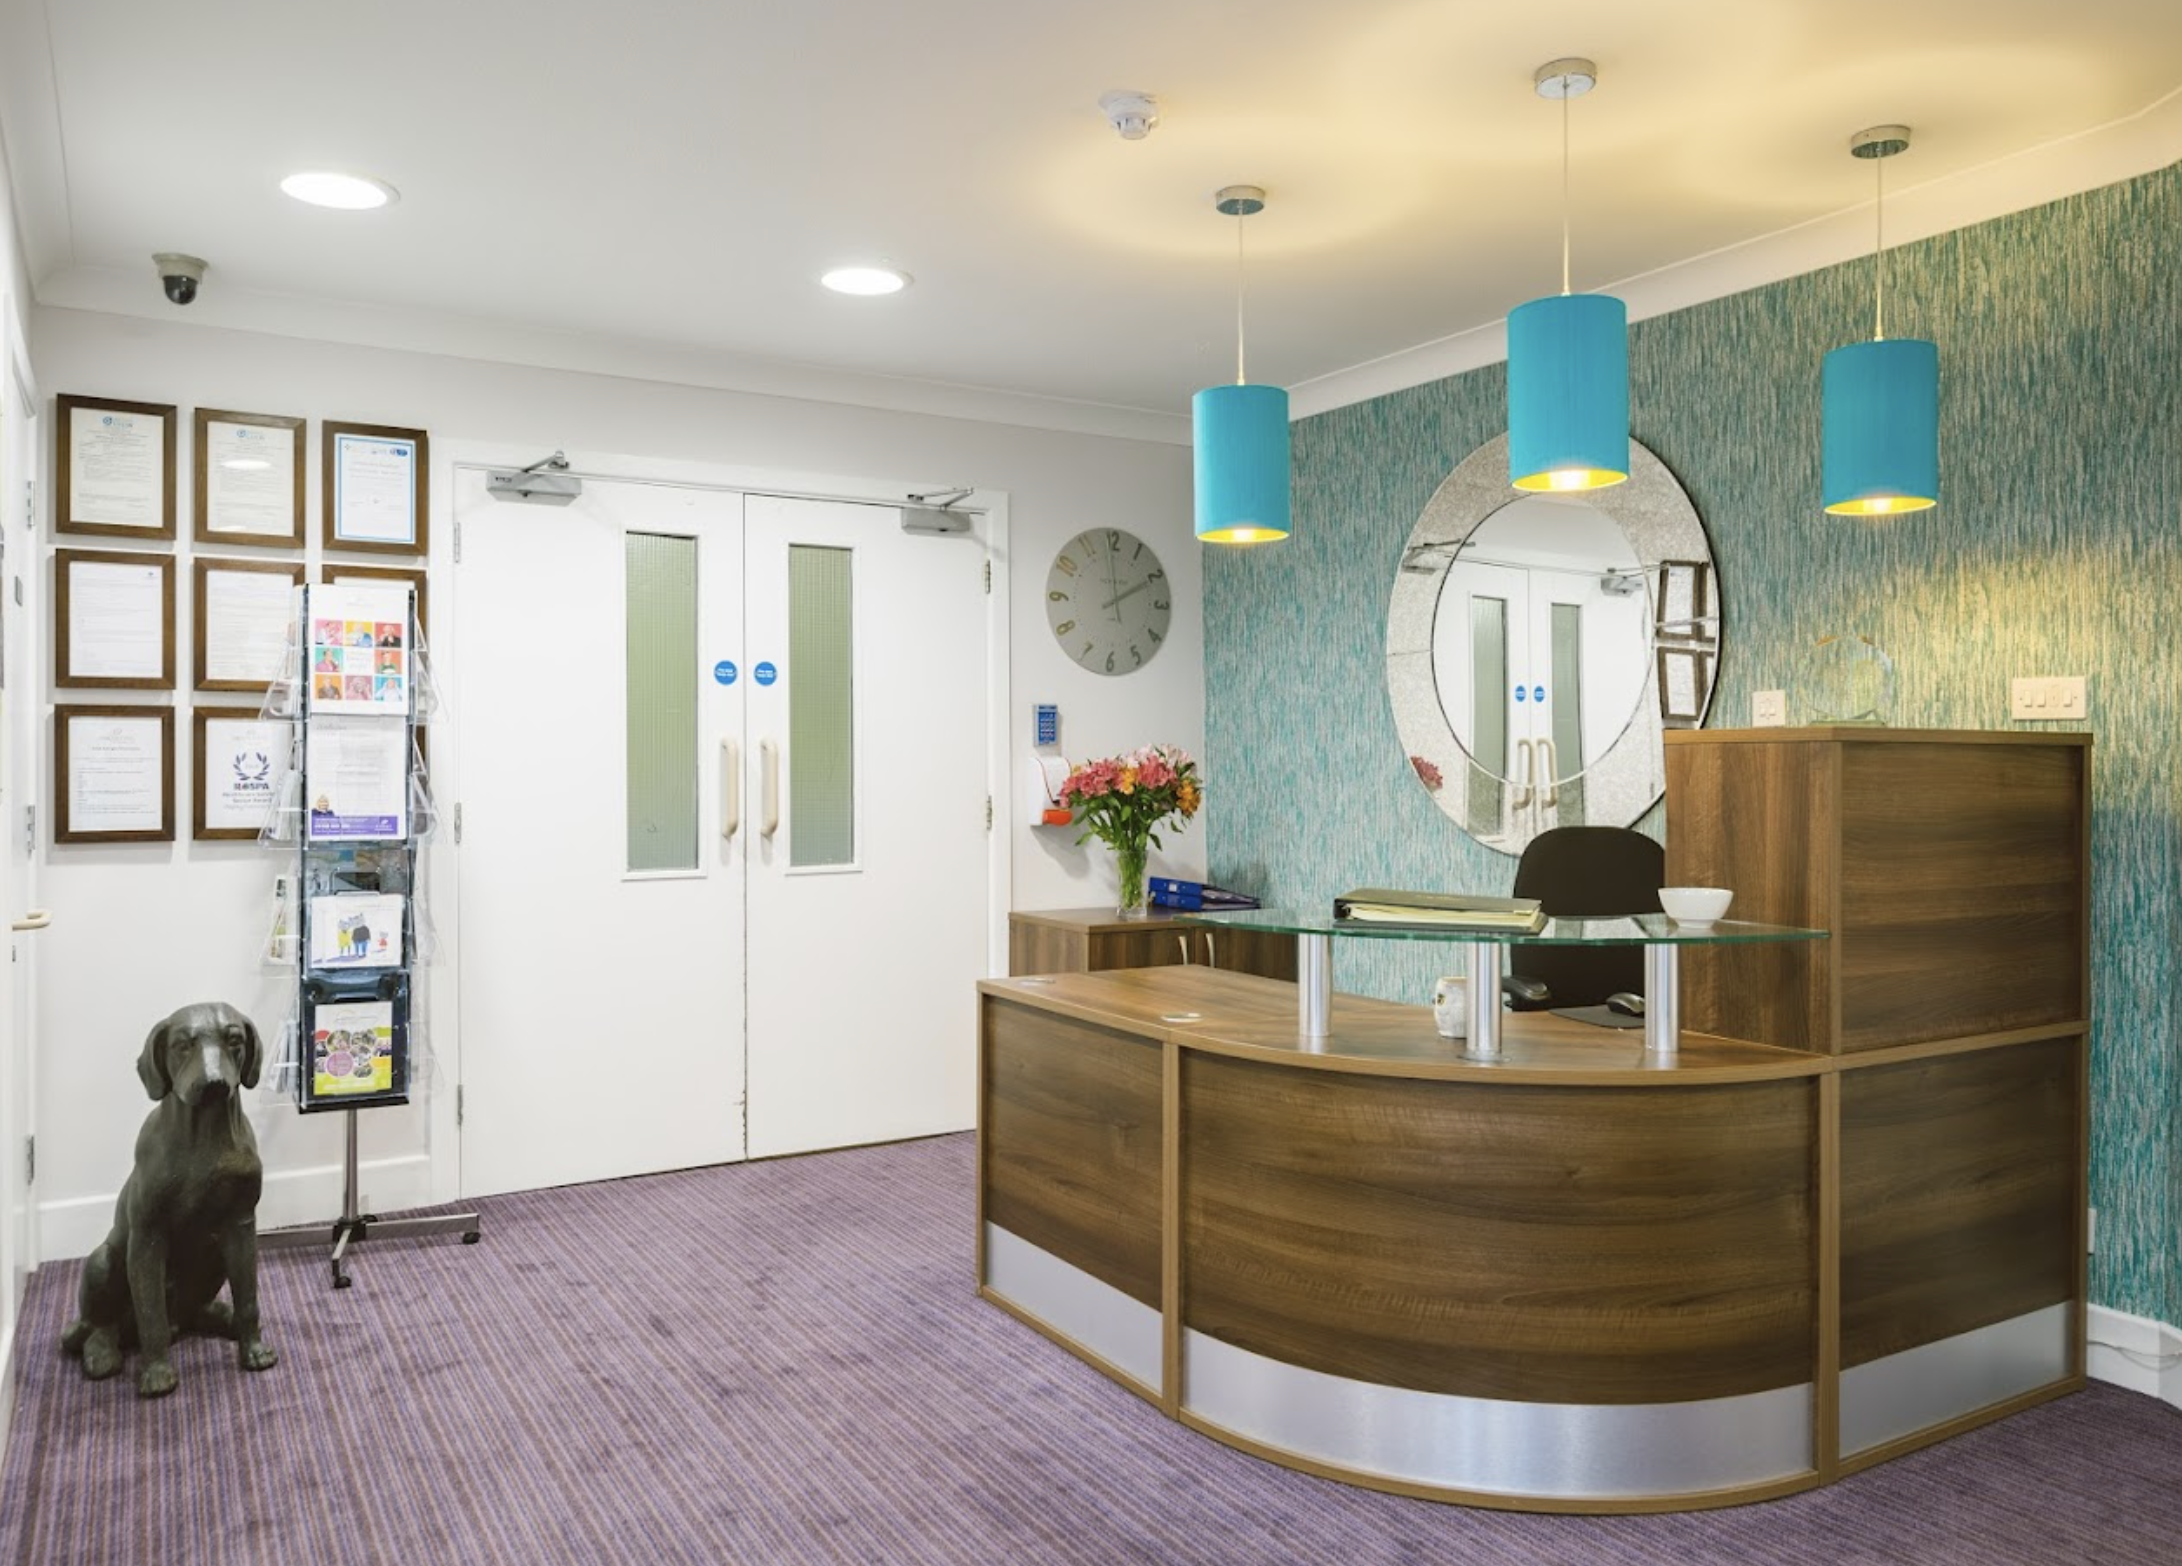 Reception of The Rhallt care home in Welshpool, Wales